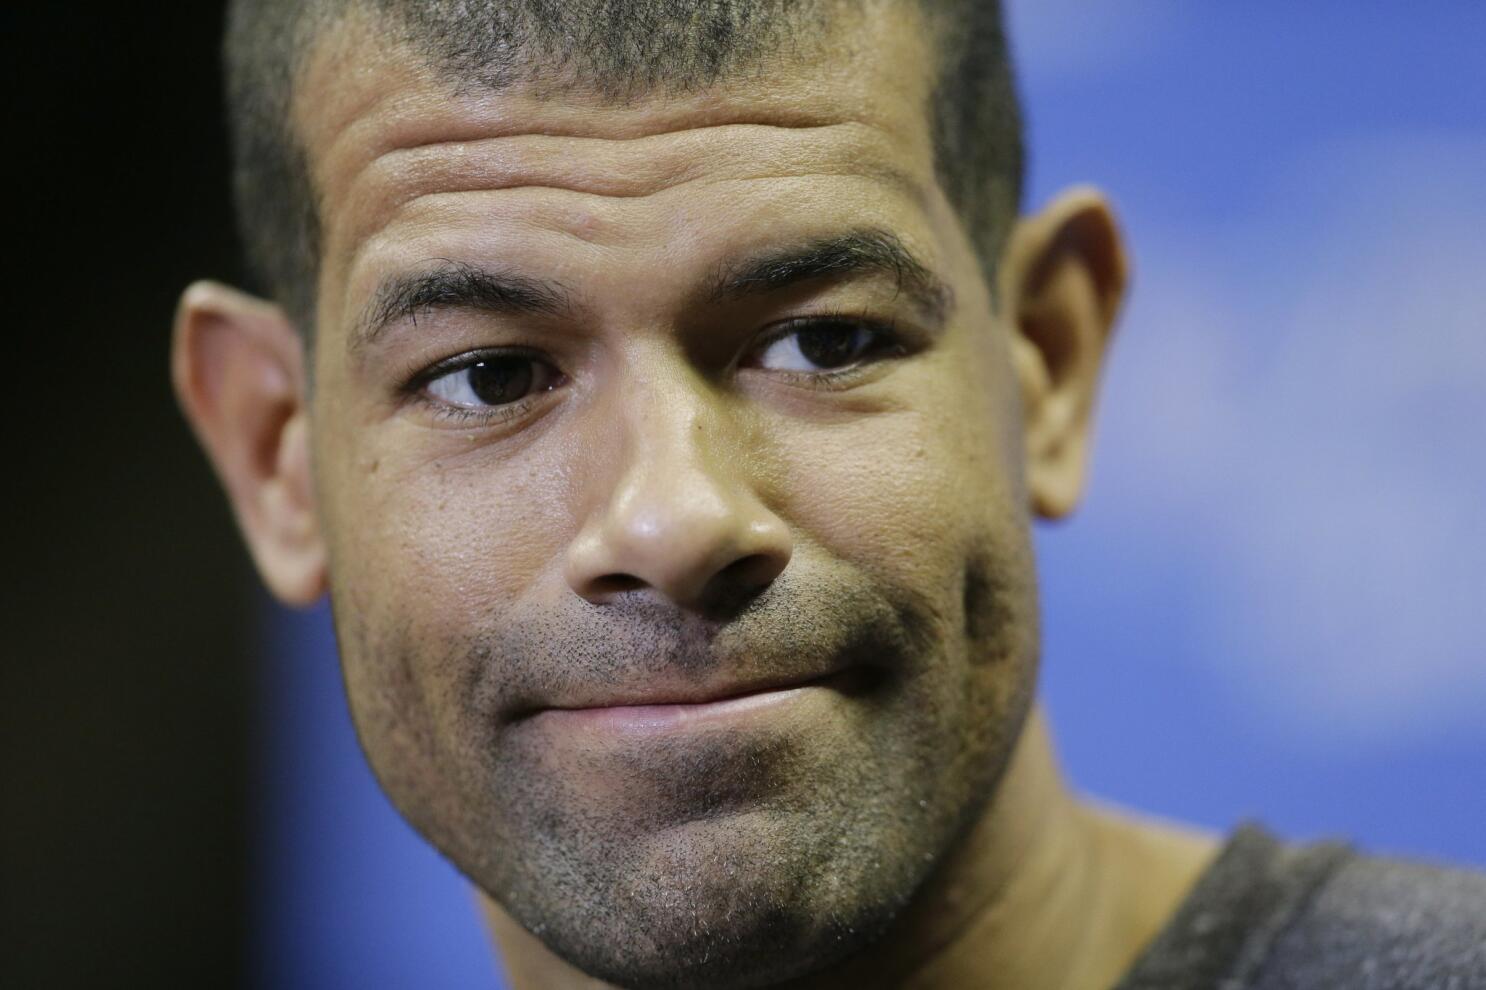 Shane Battier says LeBron James could have been a Dukie